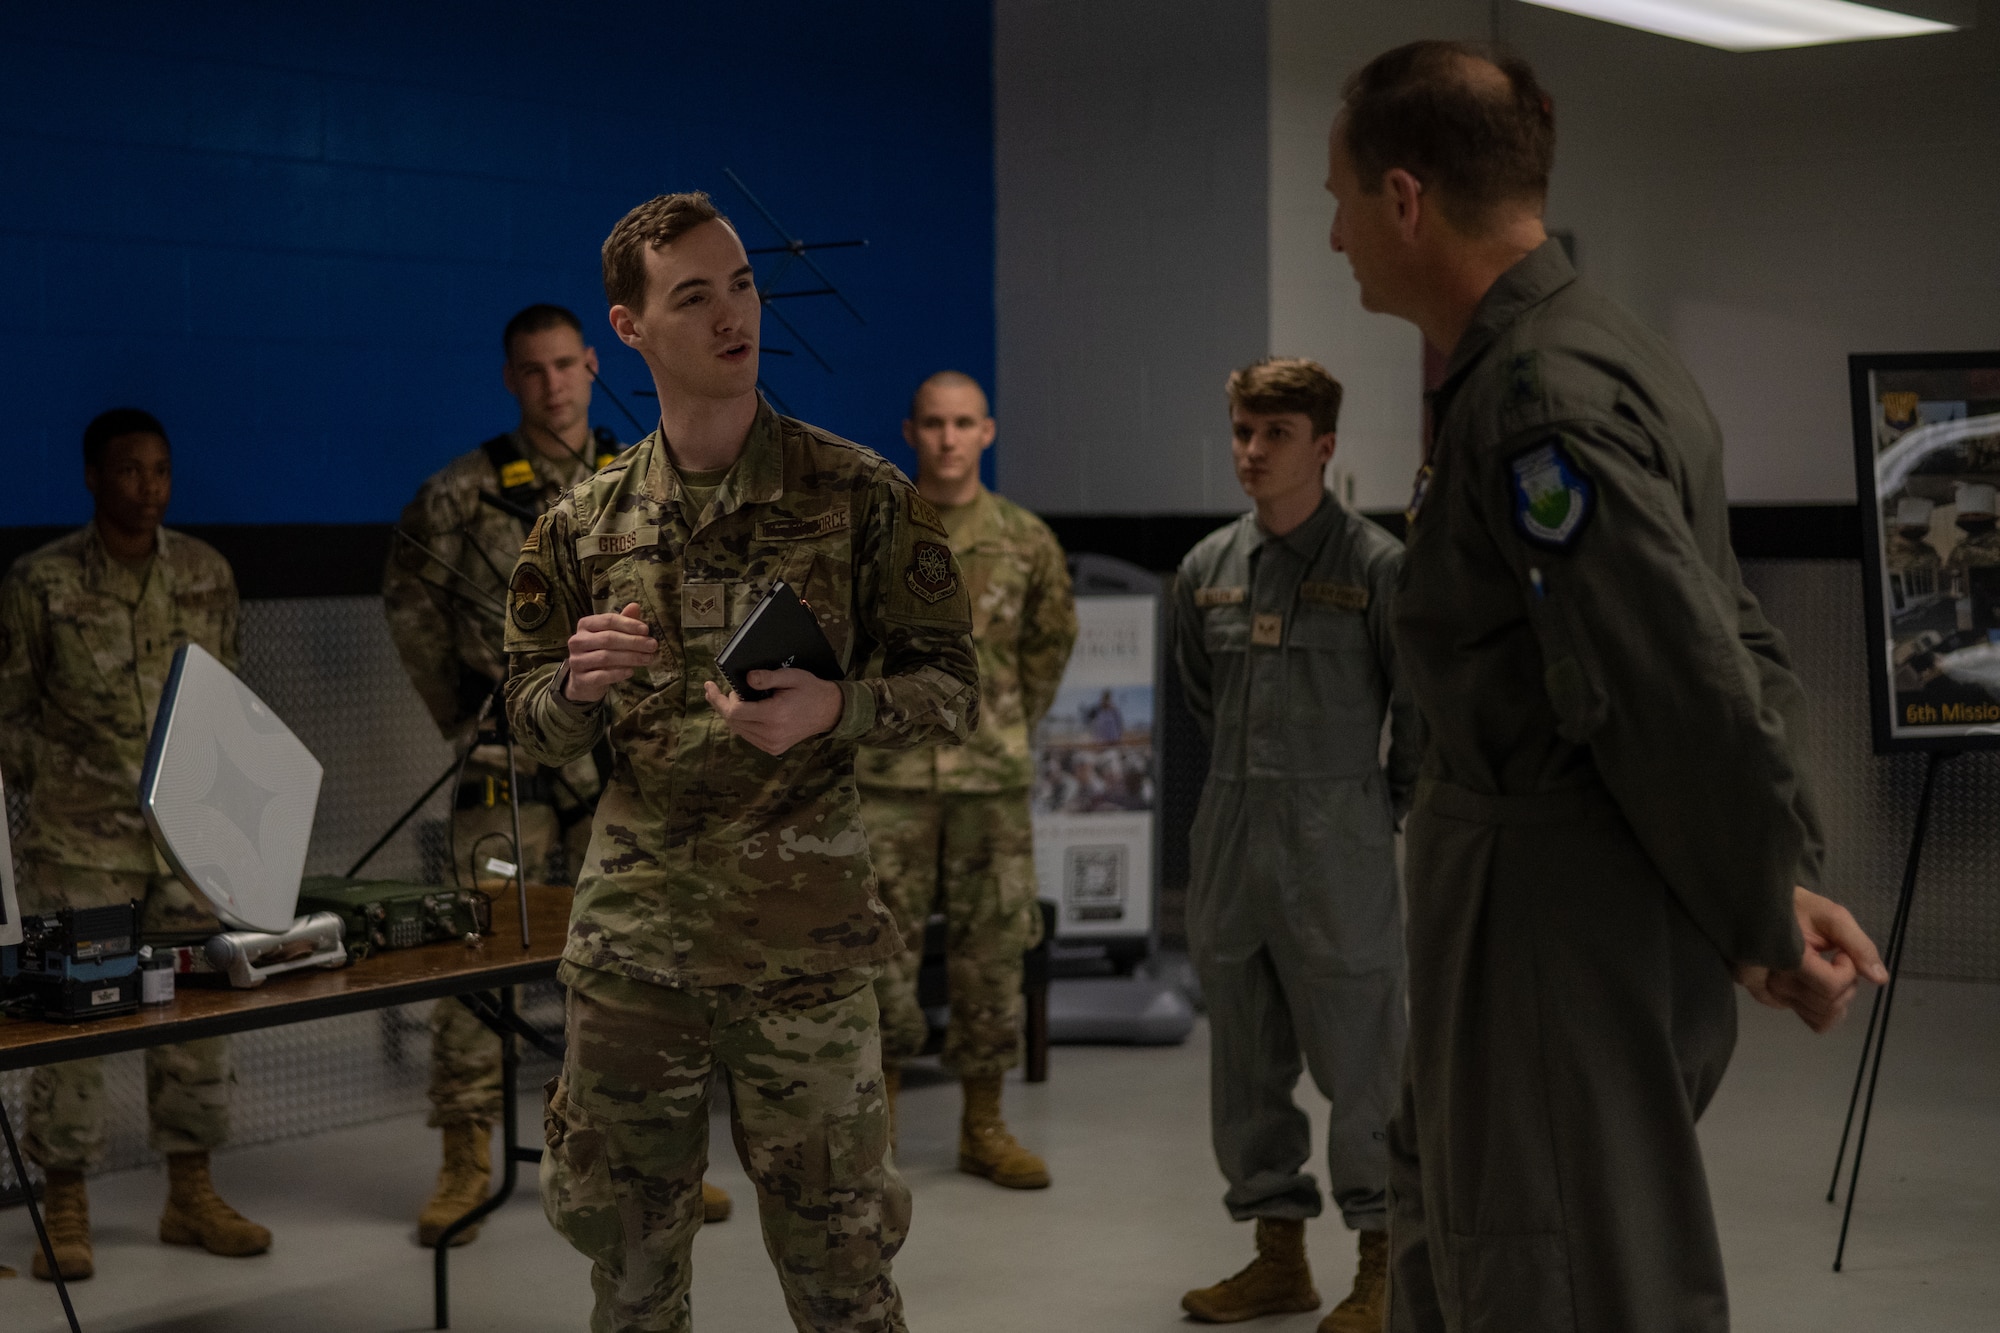 During the tour, Martin and the 18th AF command team visited the Base Defence Operations Center and received an unmanned aircraft systems demonstration. (U.S. Air Force photo by Airman 1st Class Zachary Foster)